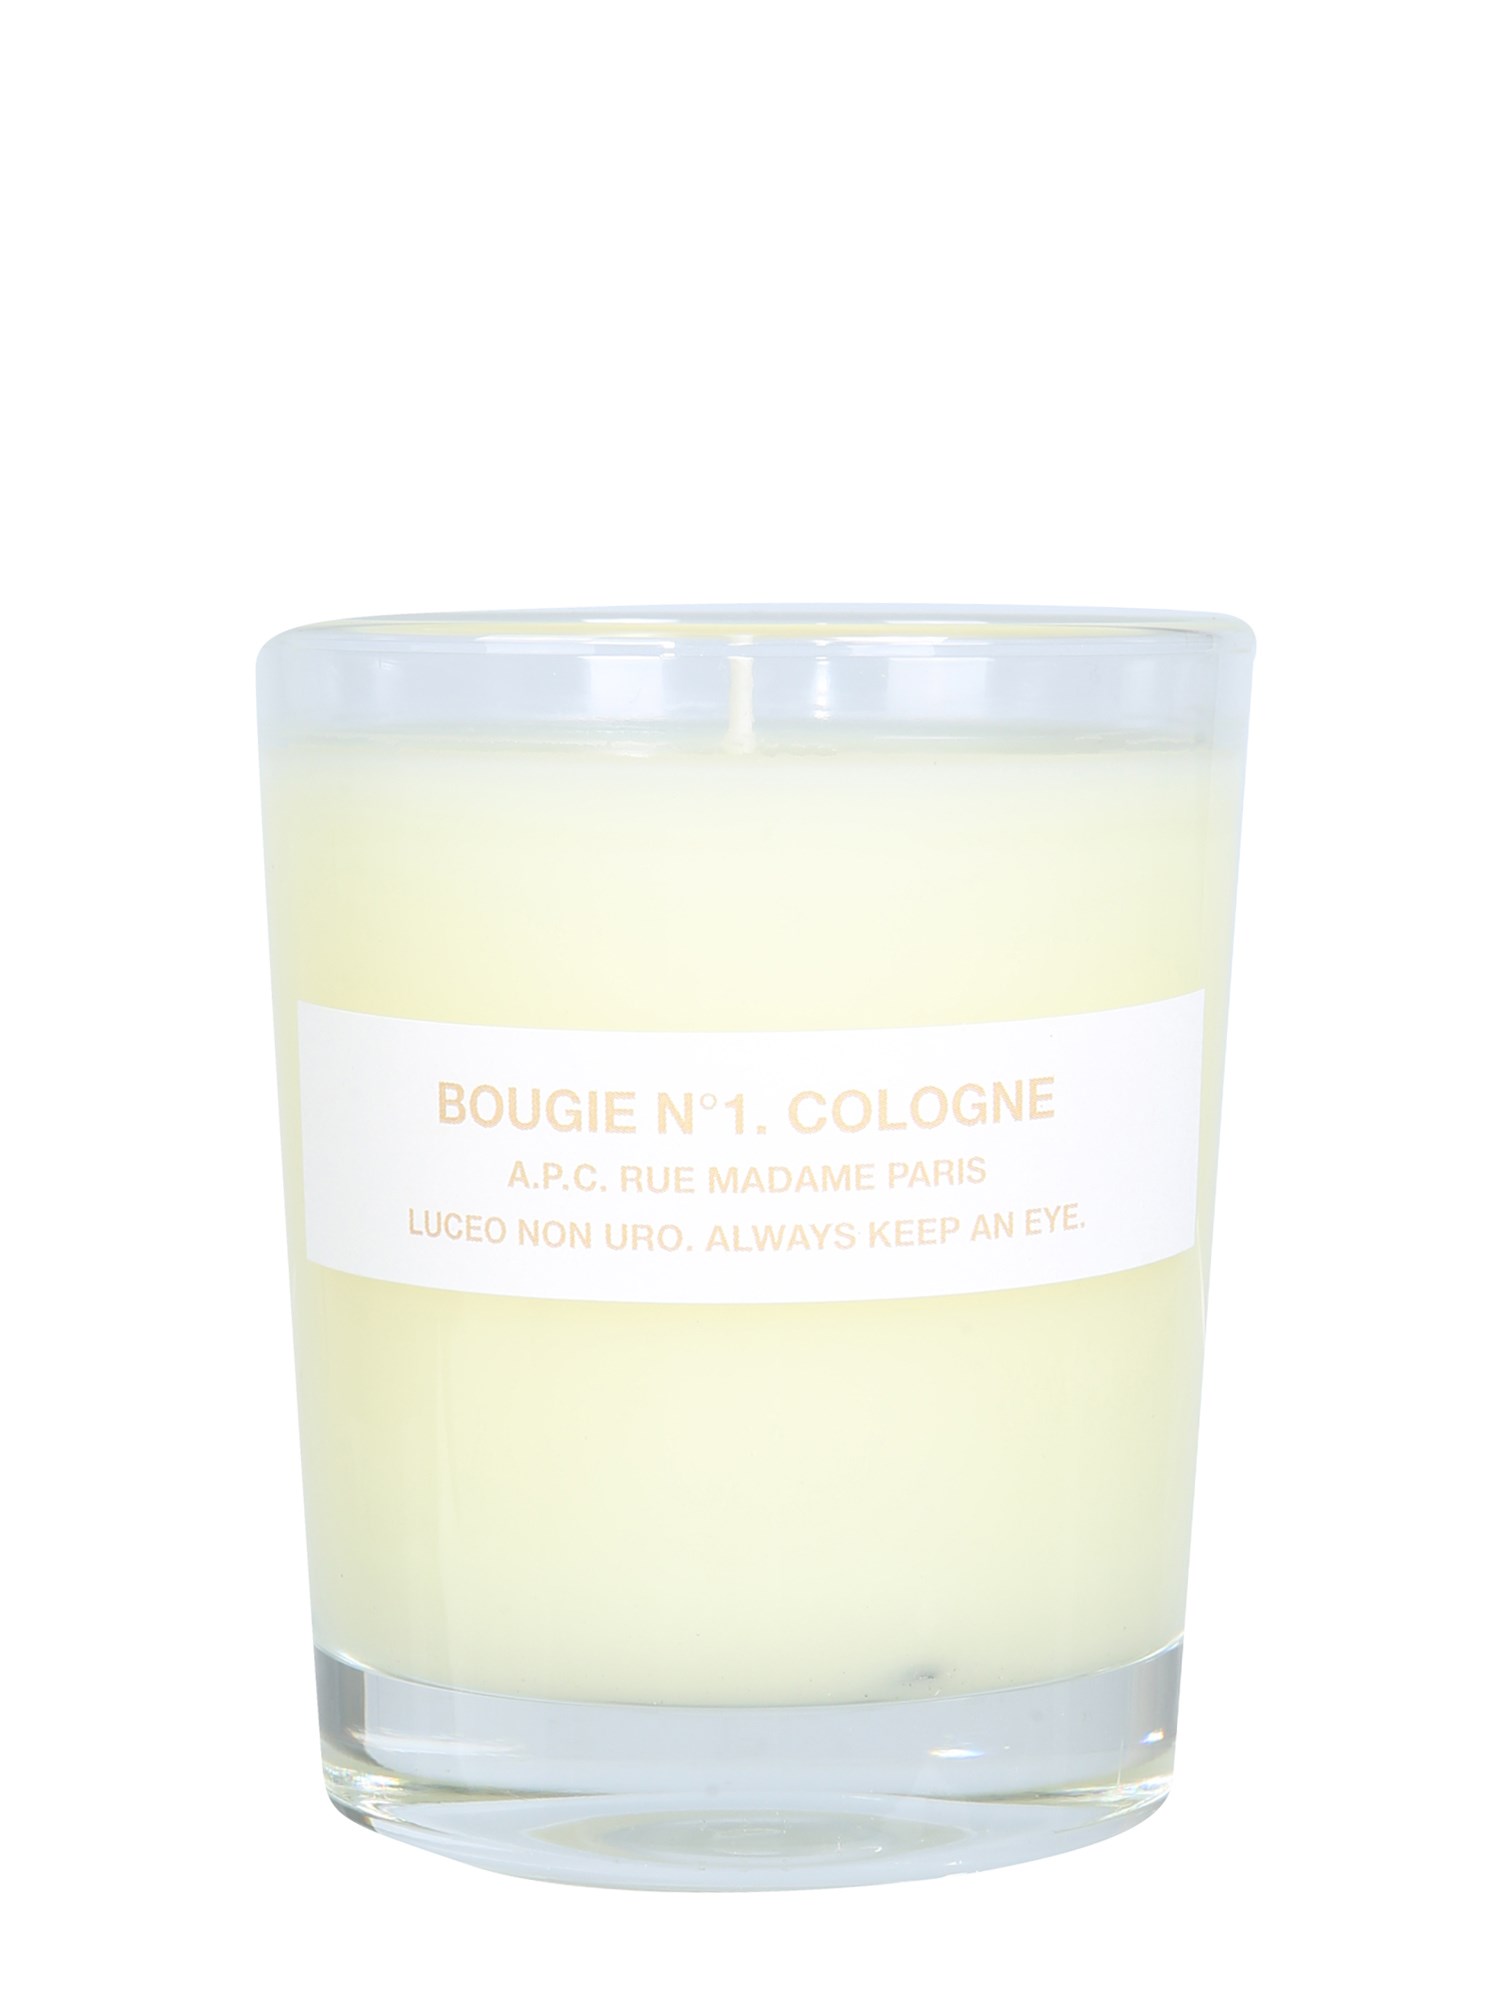 A.P.C. a.p.c. large candle